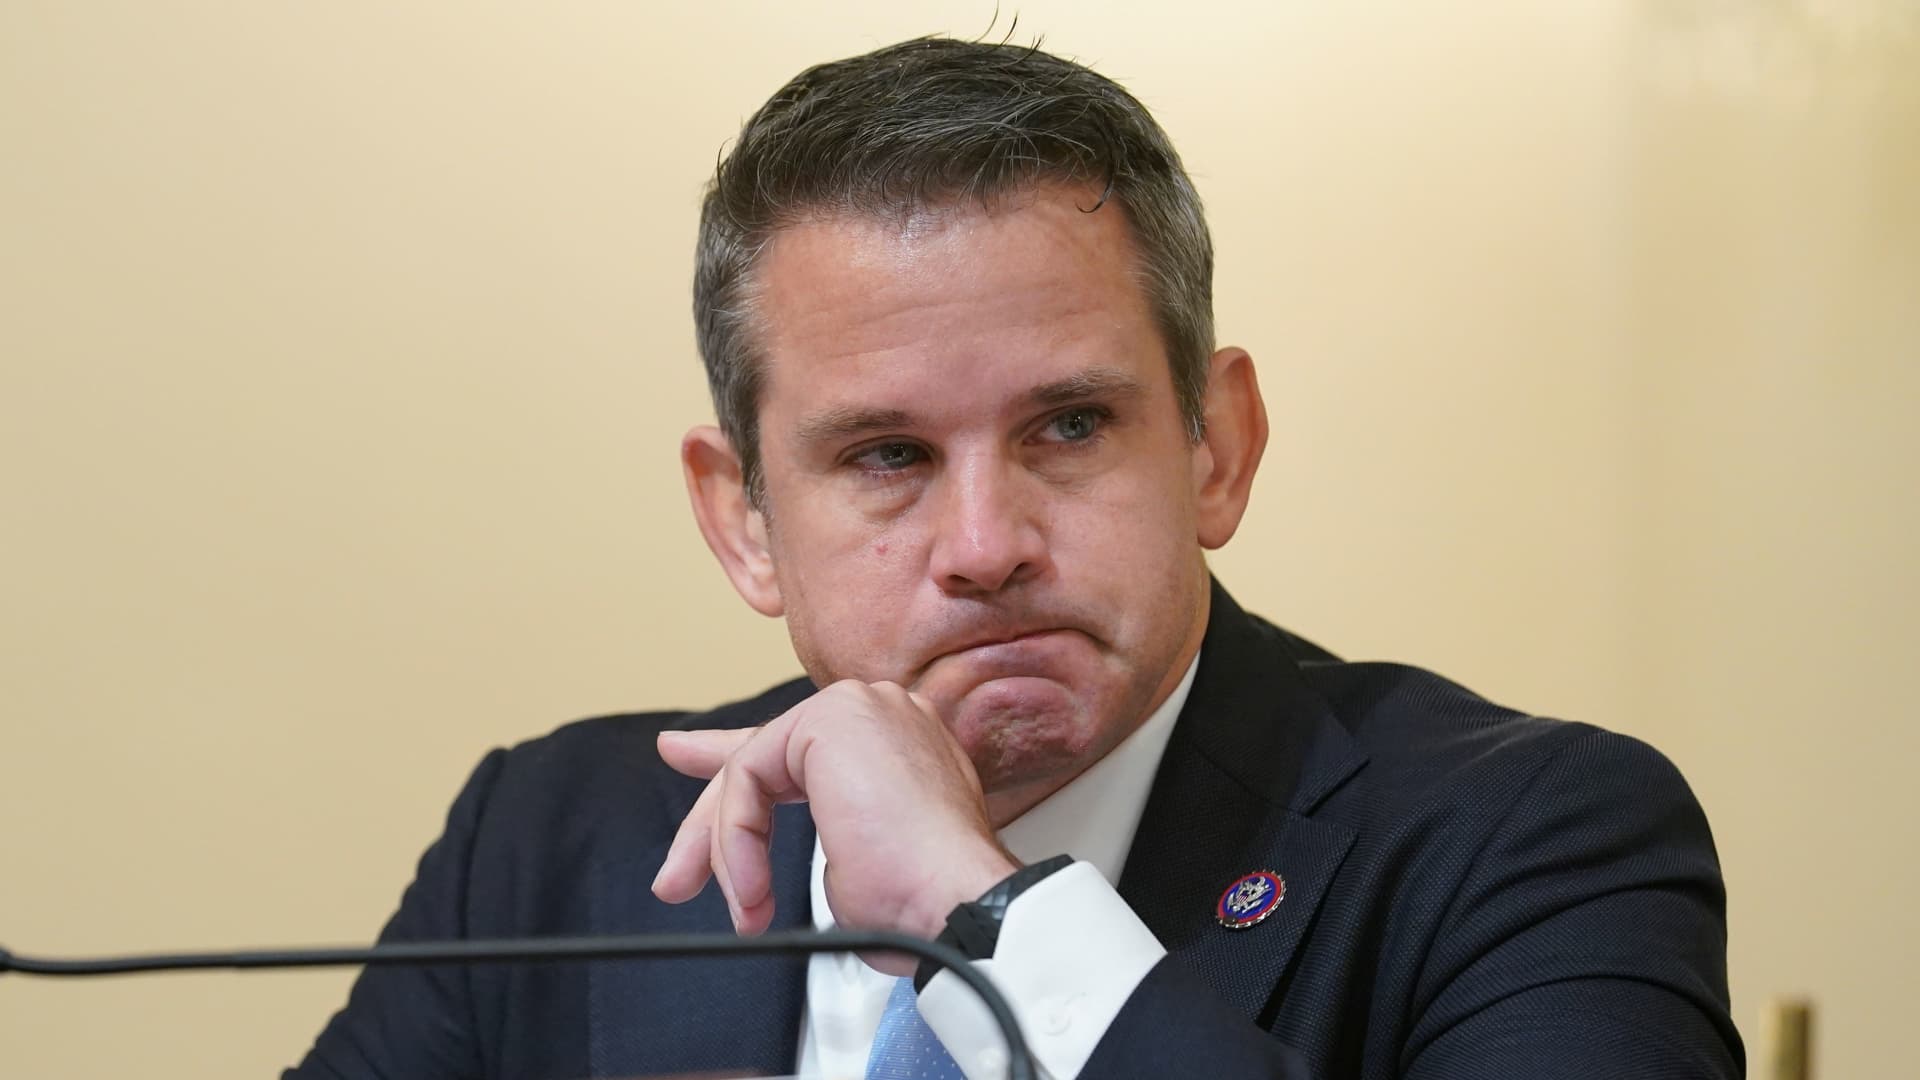 U.S. Rep. Adam Kinzinger, R-Ill., listens during the House select committee hearing on the Jan. 6 attack on Capitol Hill in Washington, U.S., July 27, 2021.